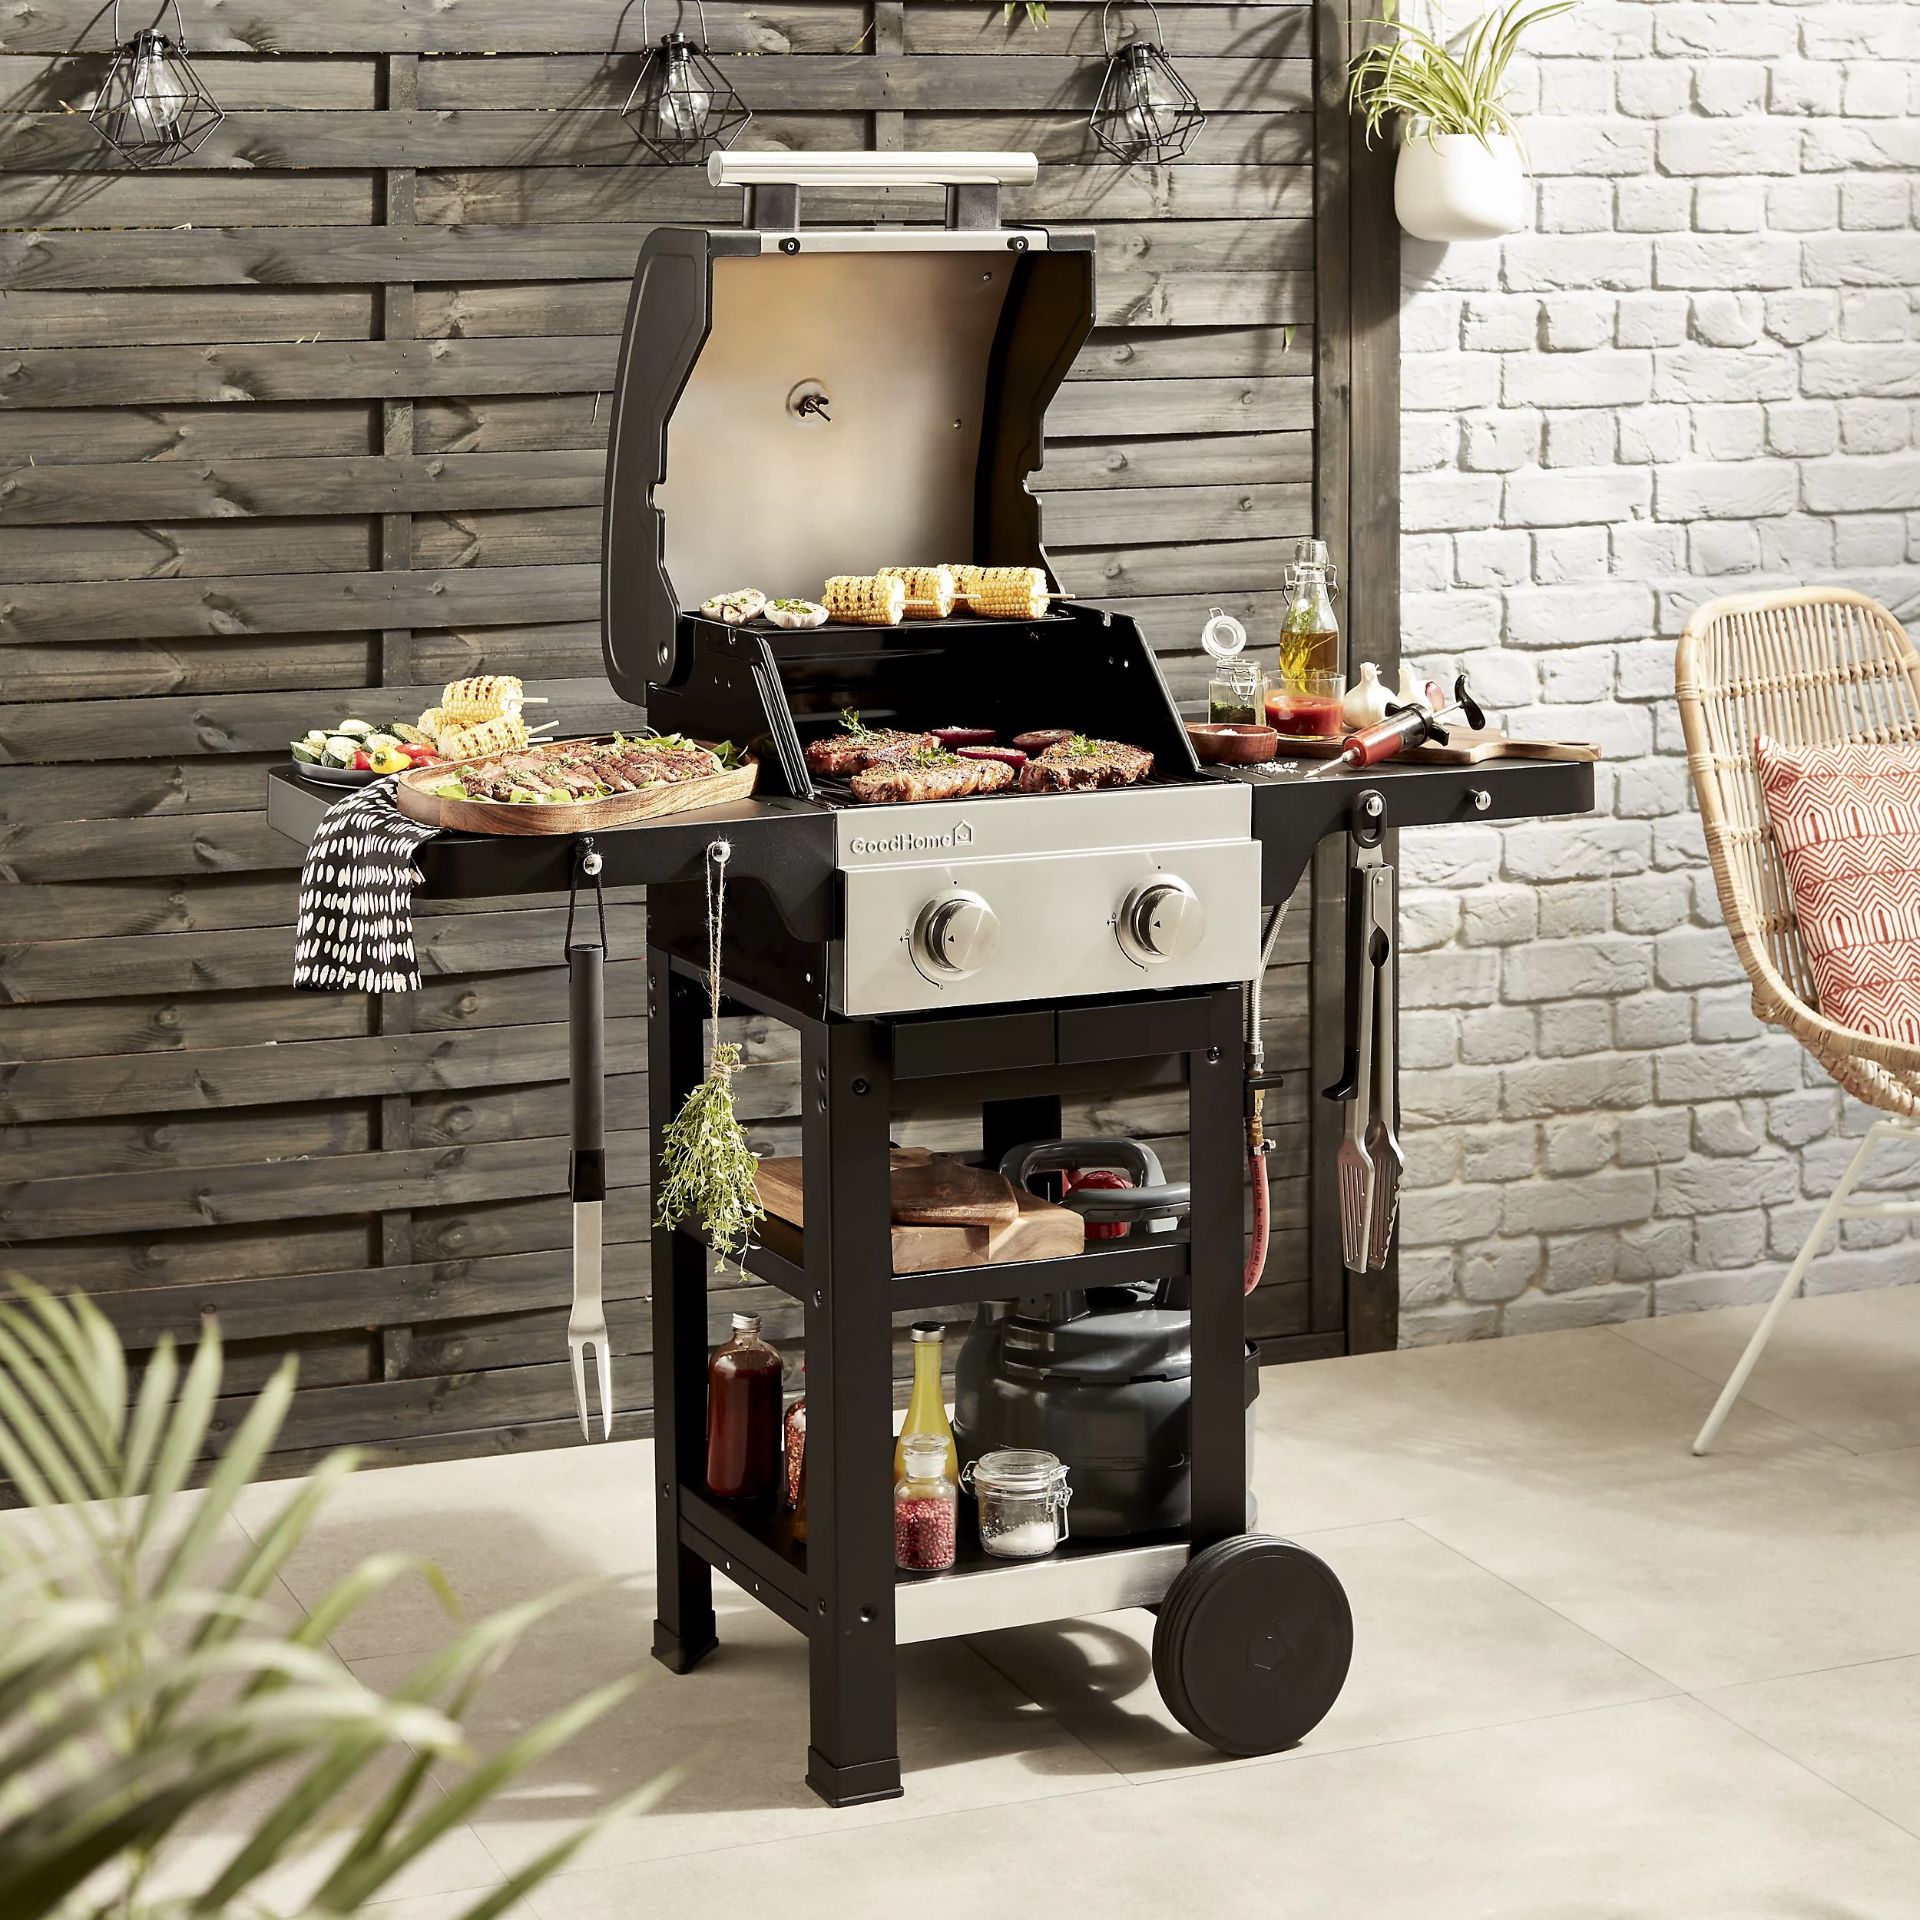 BRAND NEW OWSLEY 2.0 BLACK 2 BURNER GAS BBQ R15-4 - Image 10 of 10